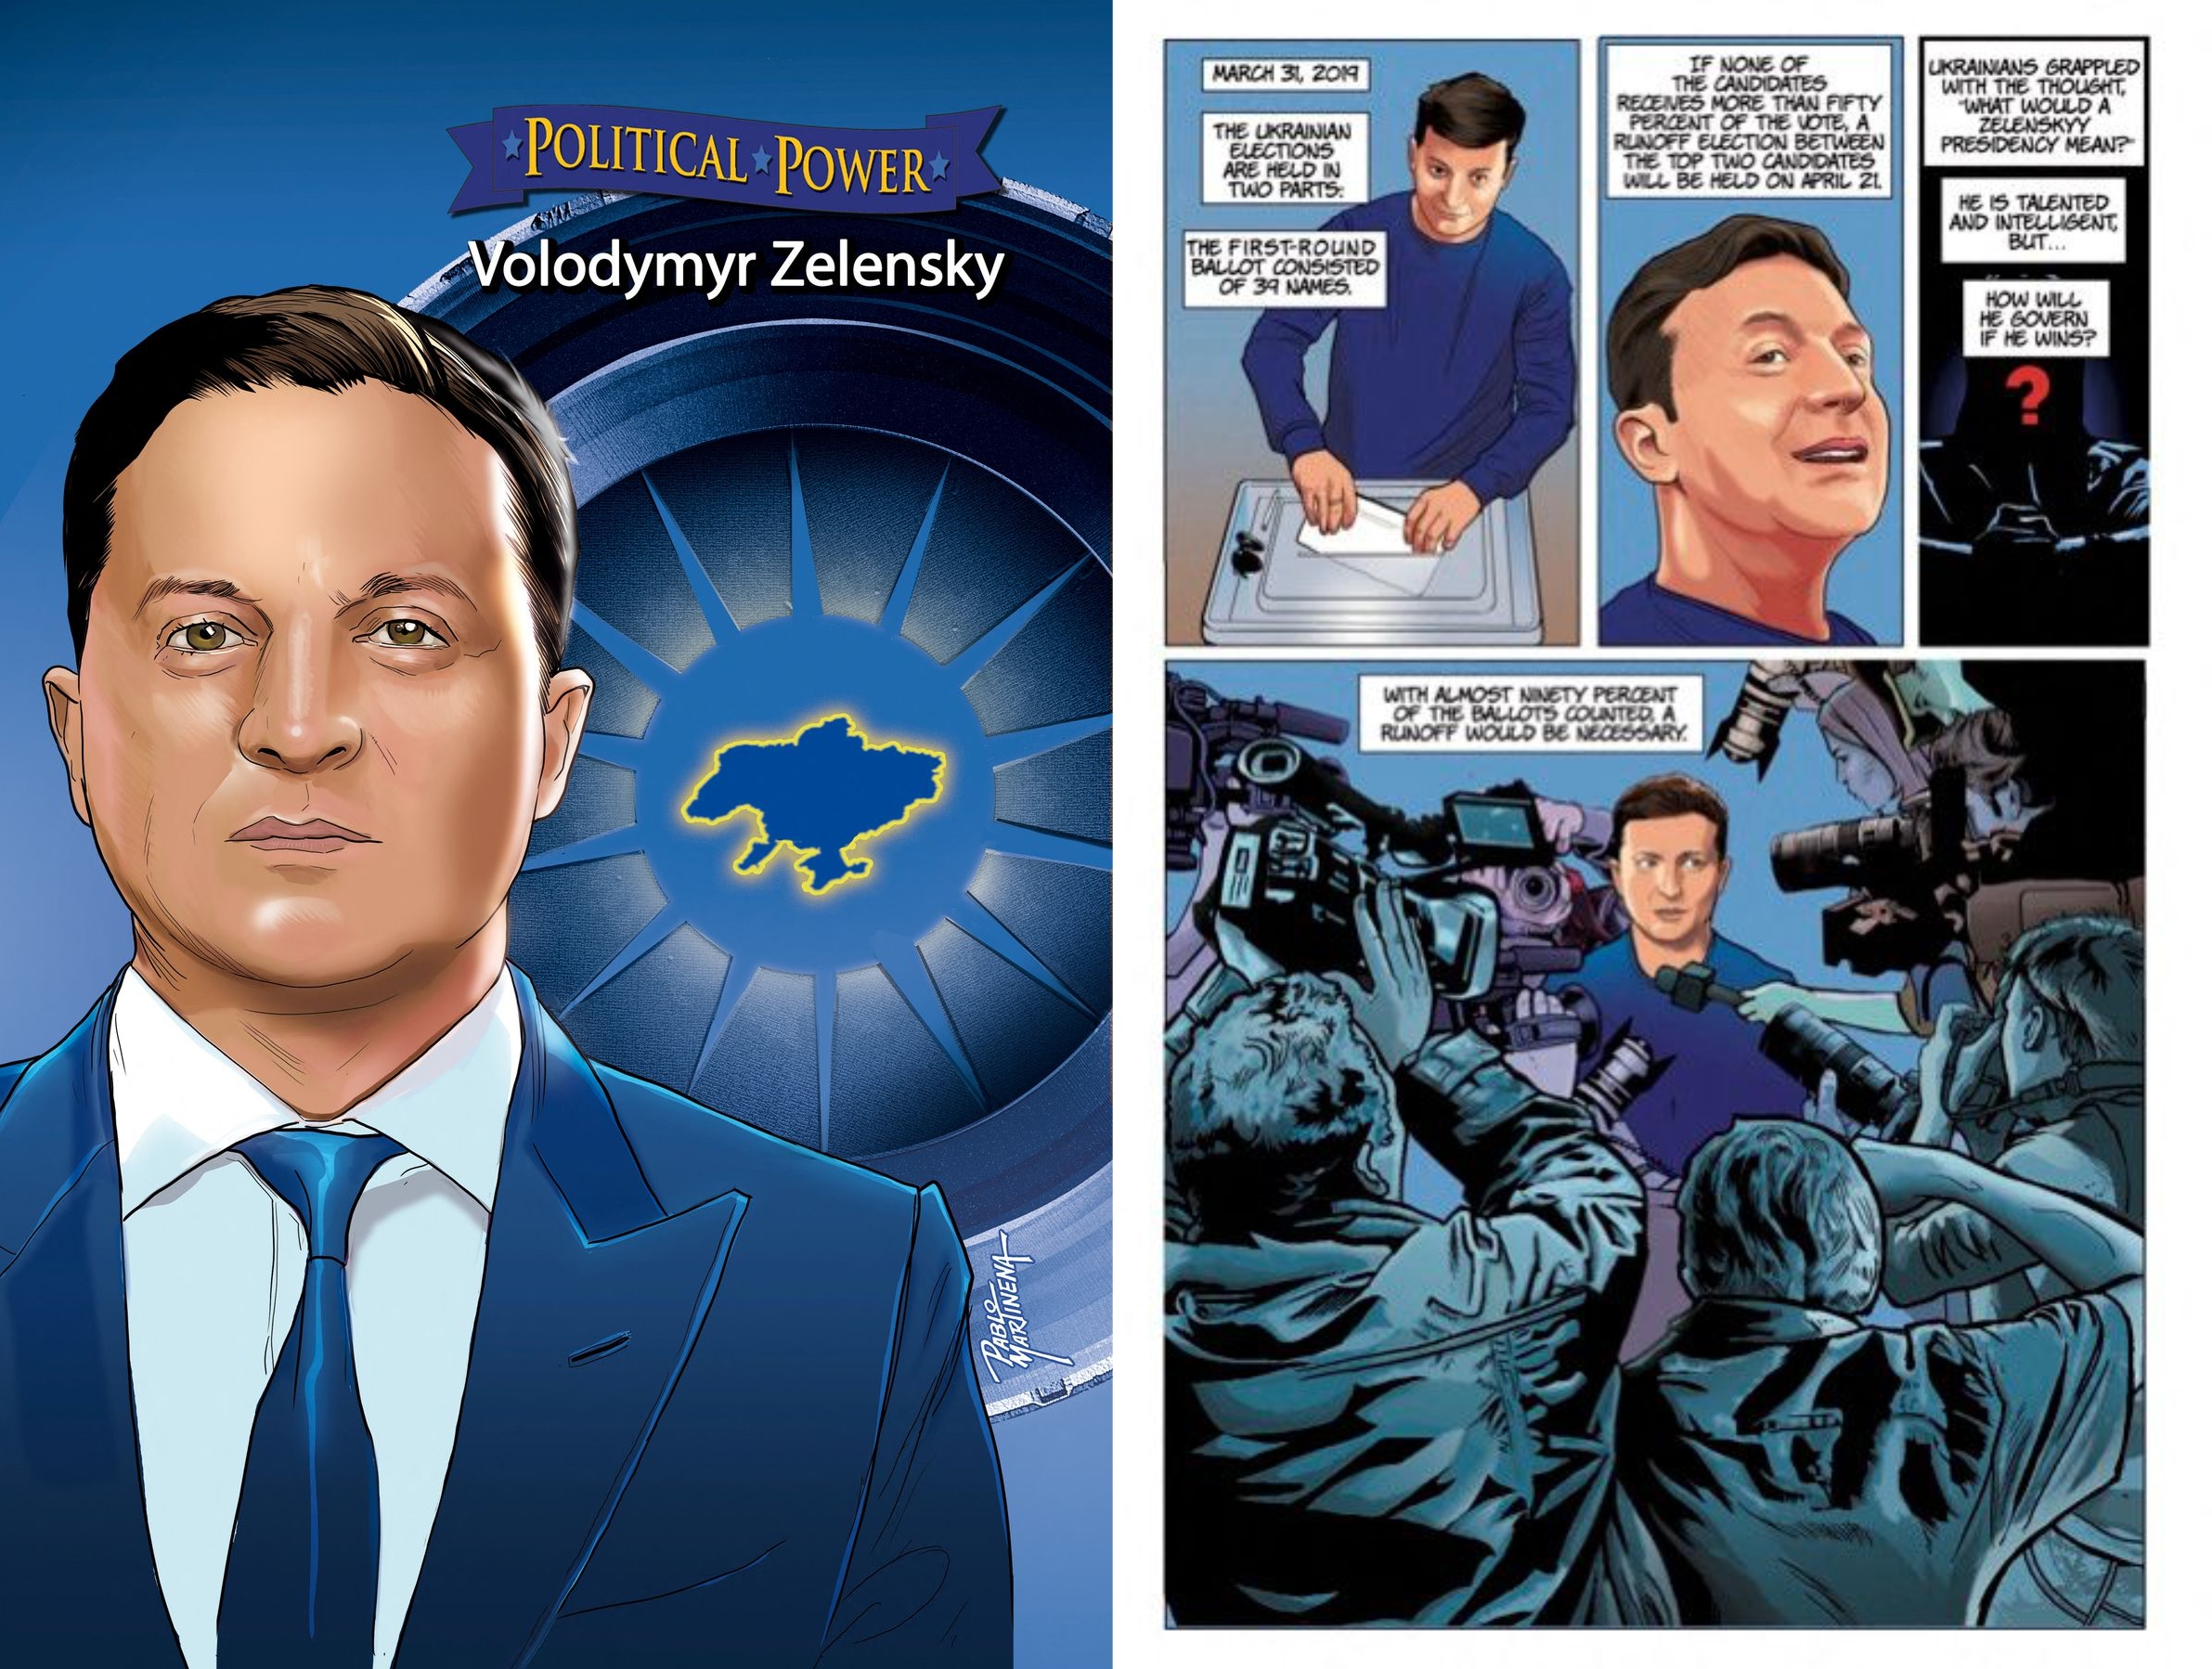 Family, Kvartal 95, the Holocaust and the 2019 elections: a biographical comic strip about Vladimir Zelensky was released in the USA